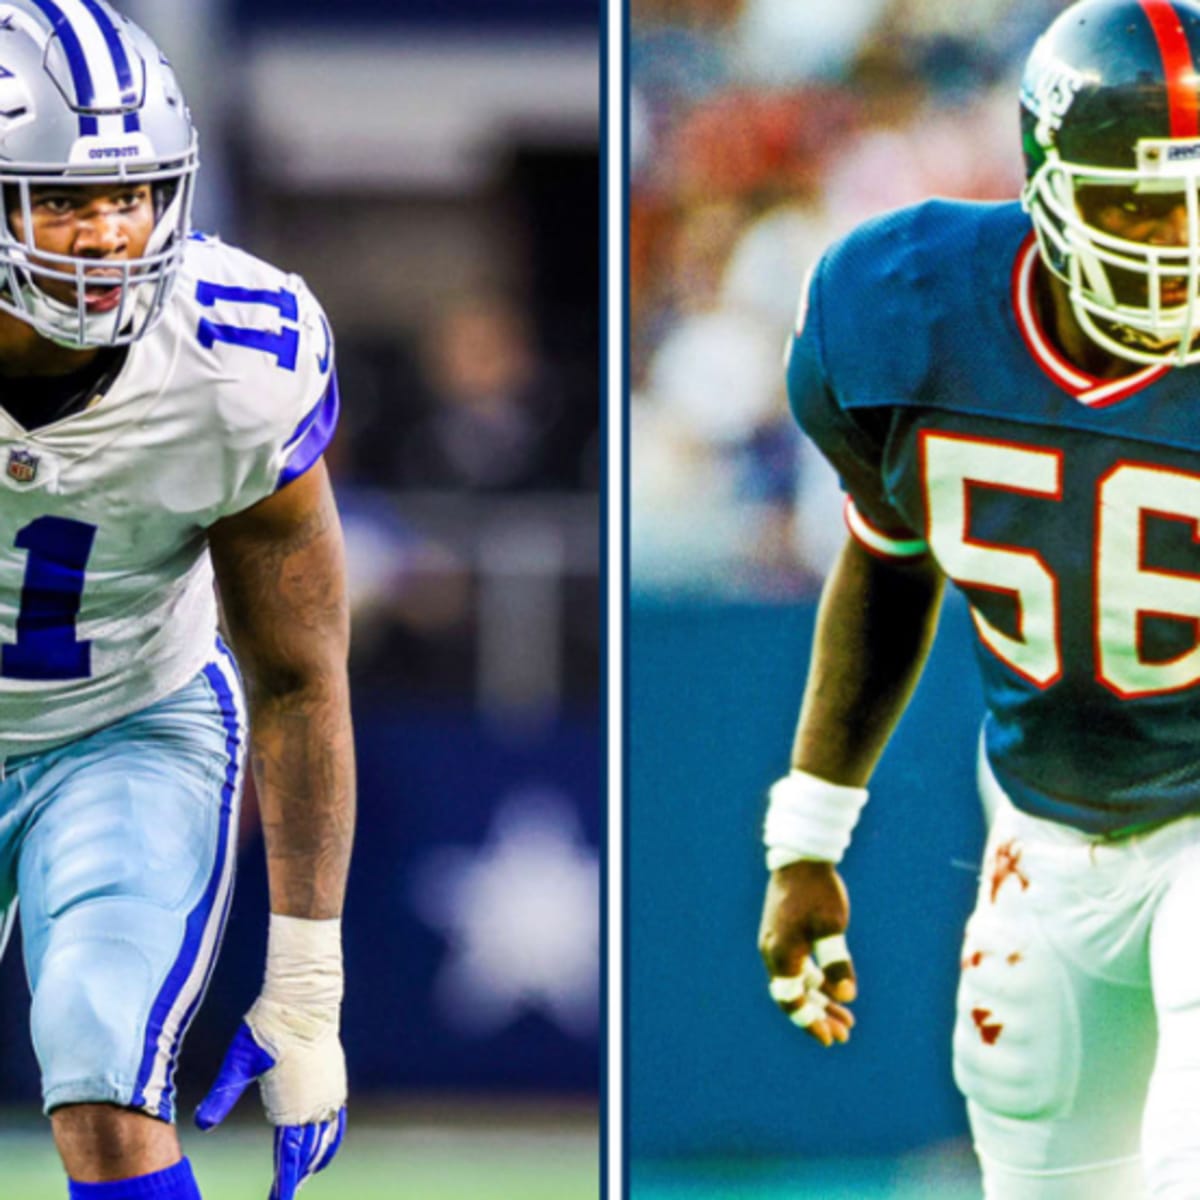 Top 10 NFL Defensive Player of the Year candidates: Cowboys